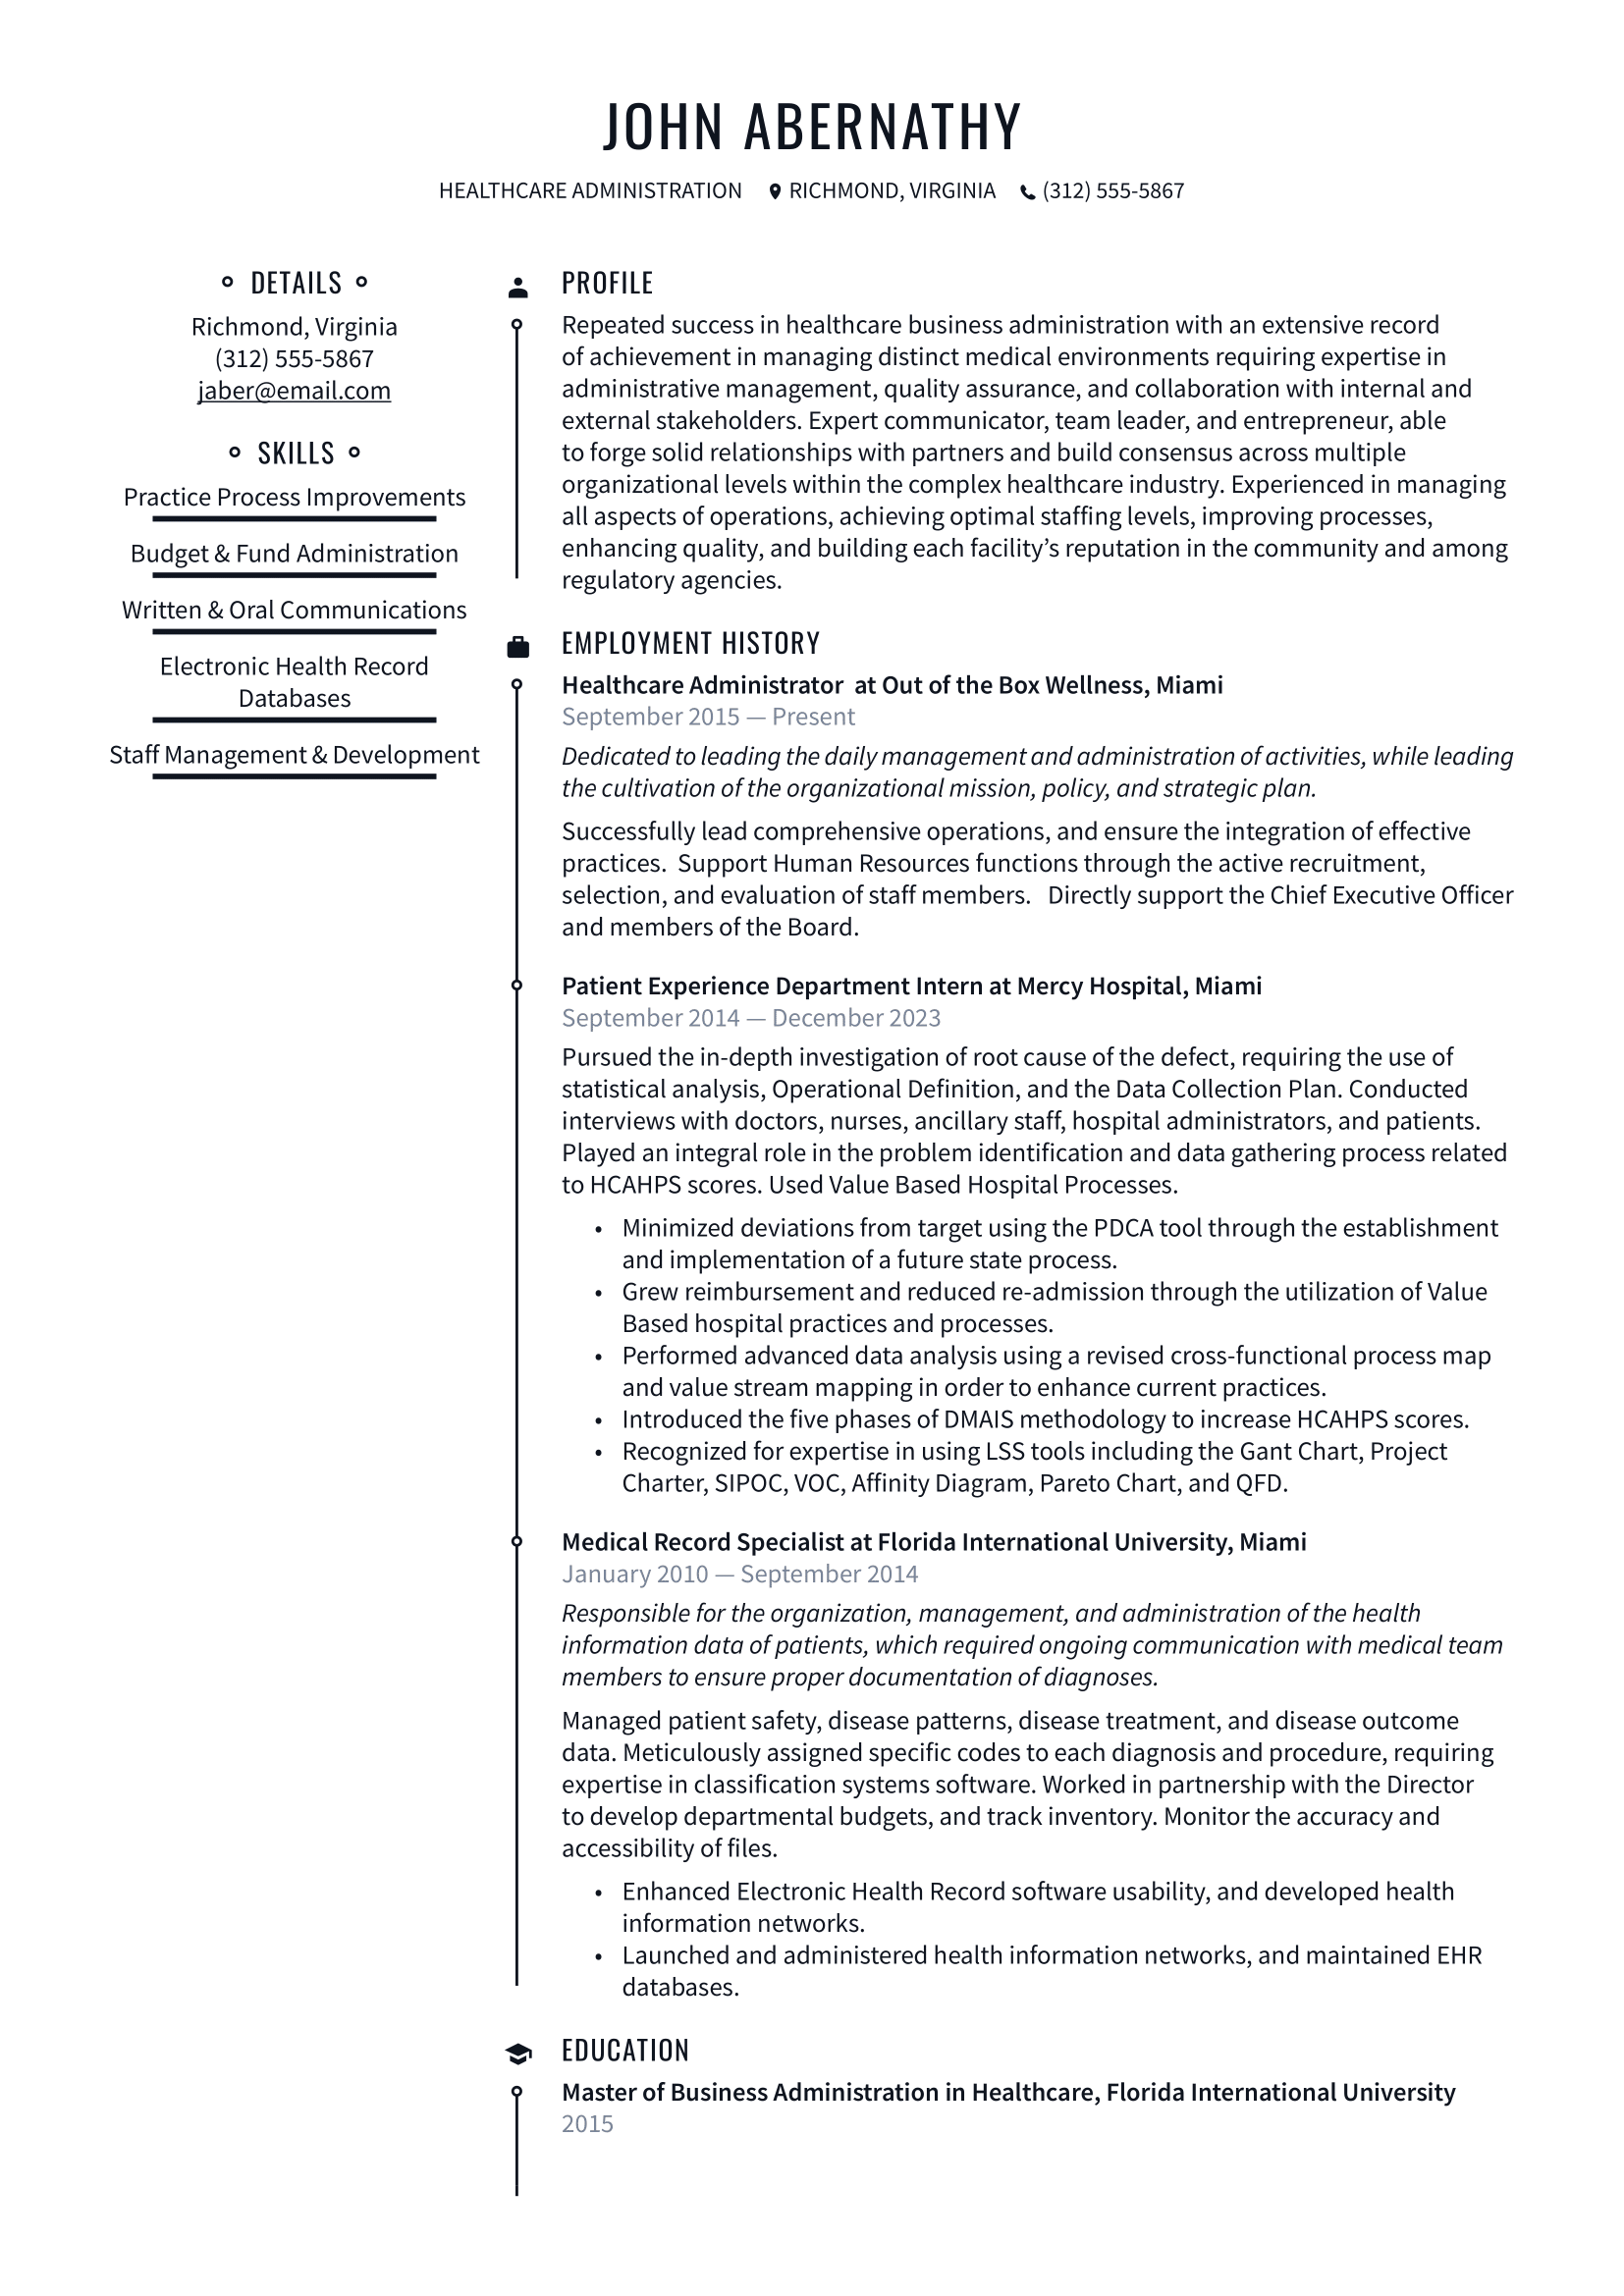 Healthcare Administration Resume Example & Writing Guide